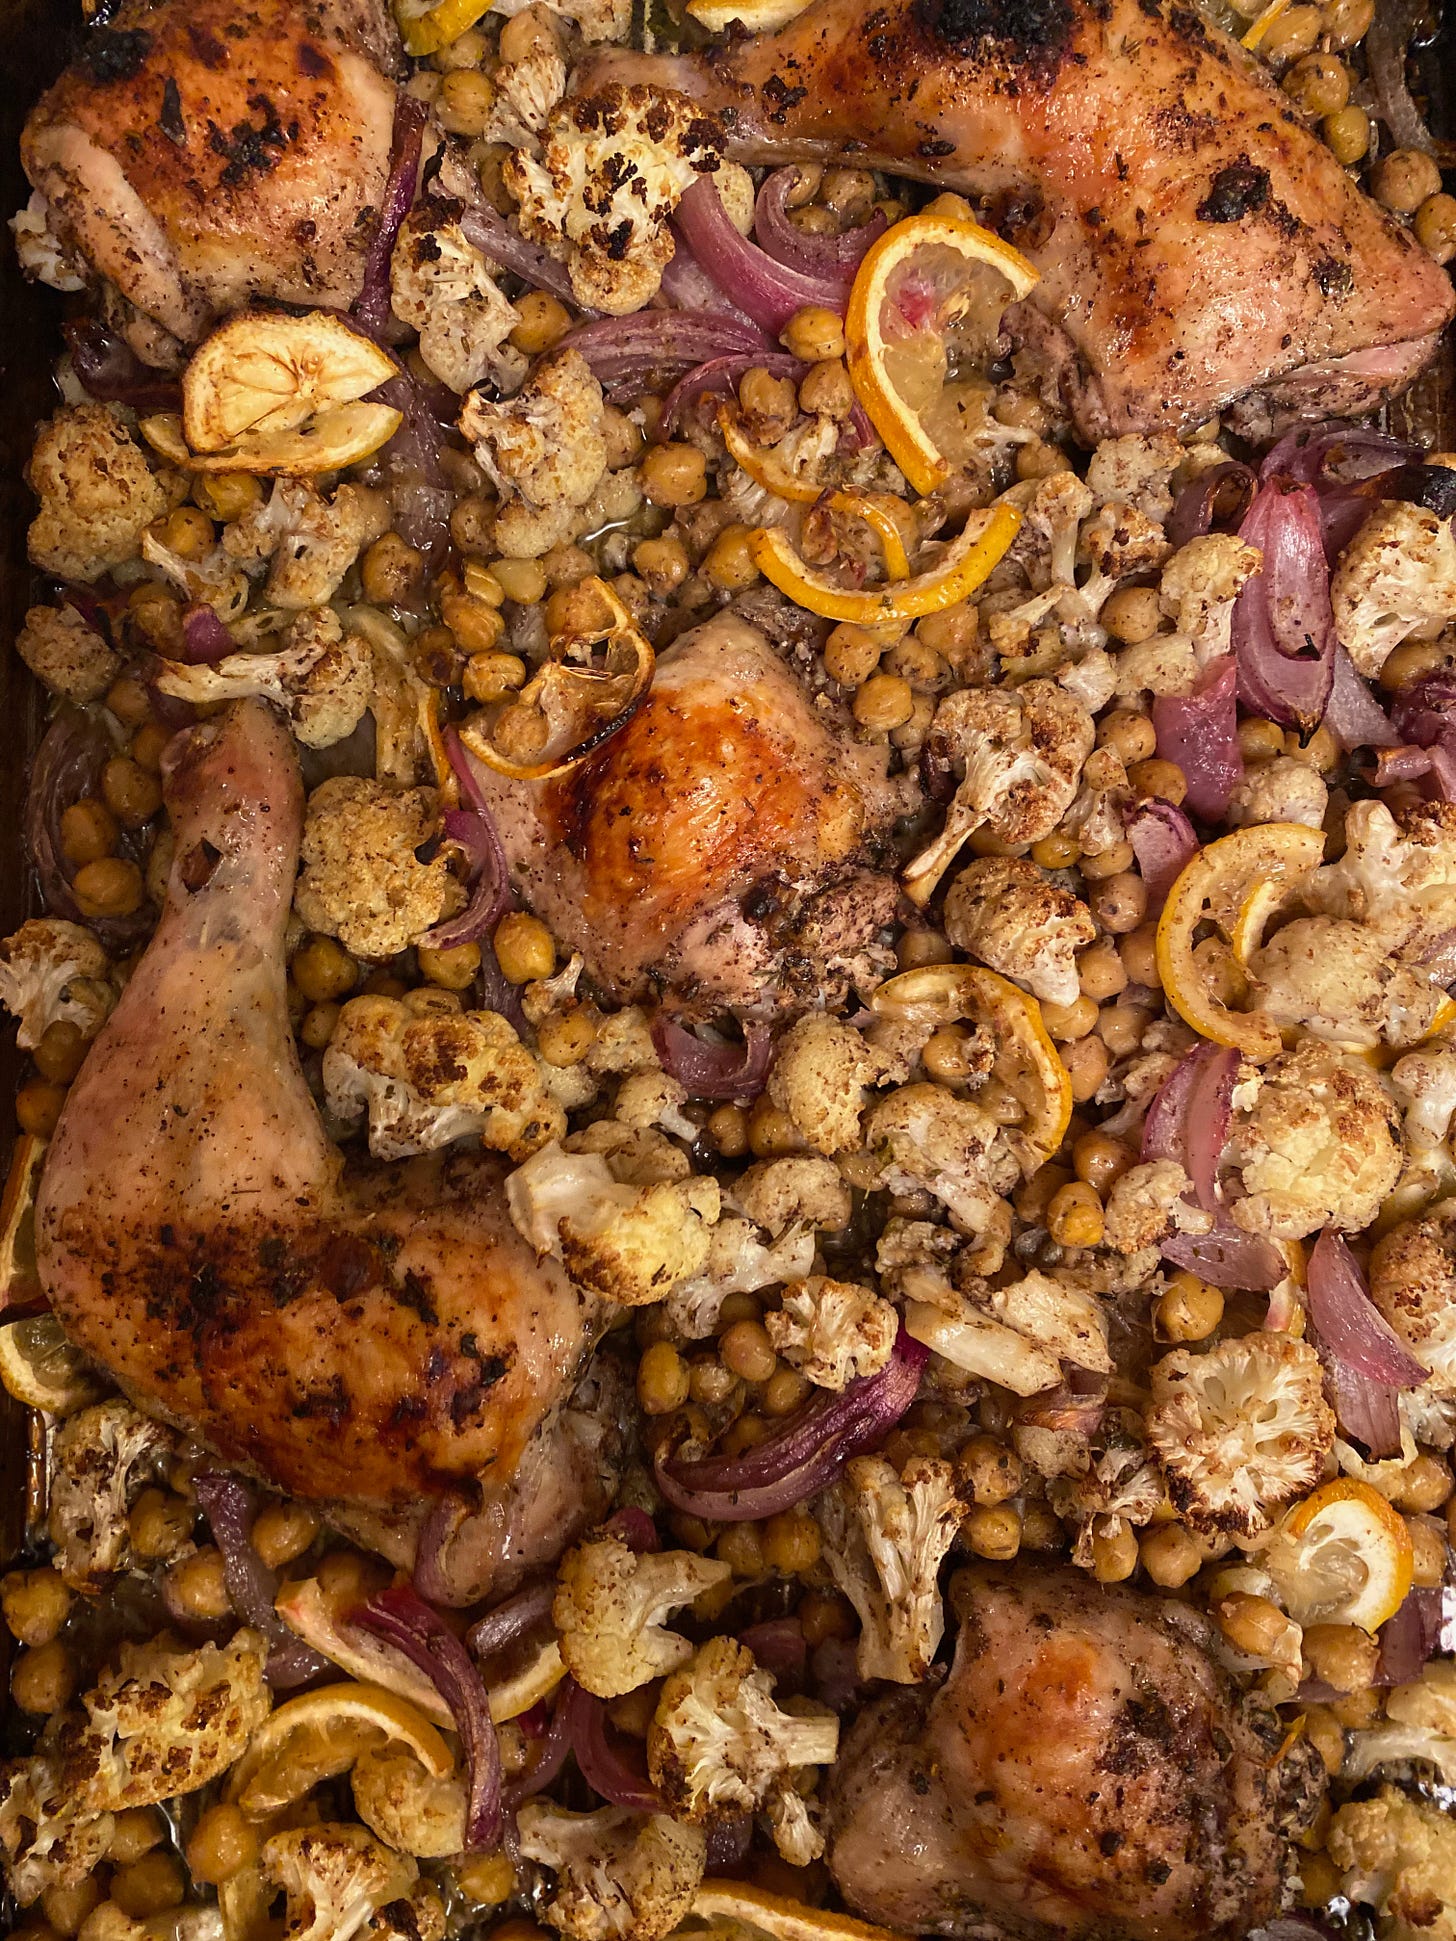 A close up of a tray of browned chicken things and breasts, lemon slices, charred cauliflower, red onion wedges, and chickpeas.